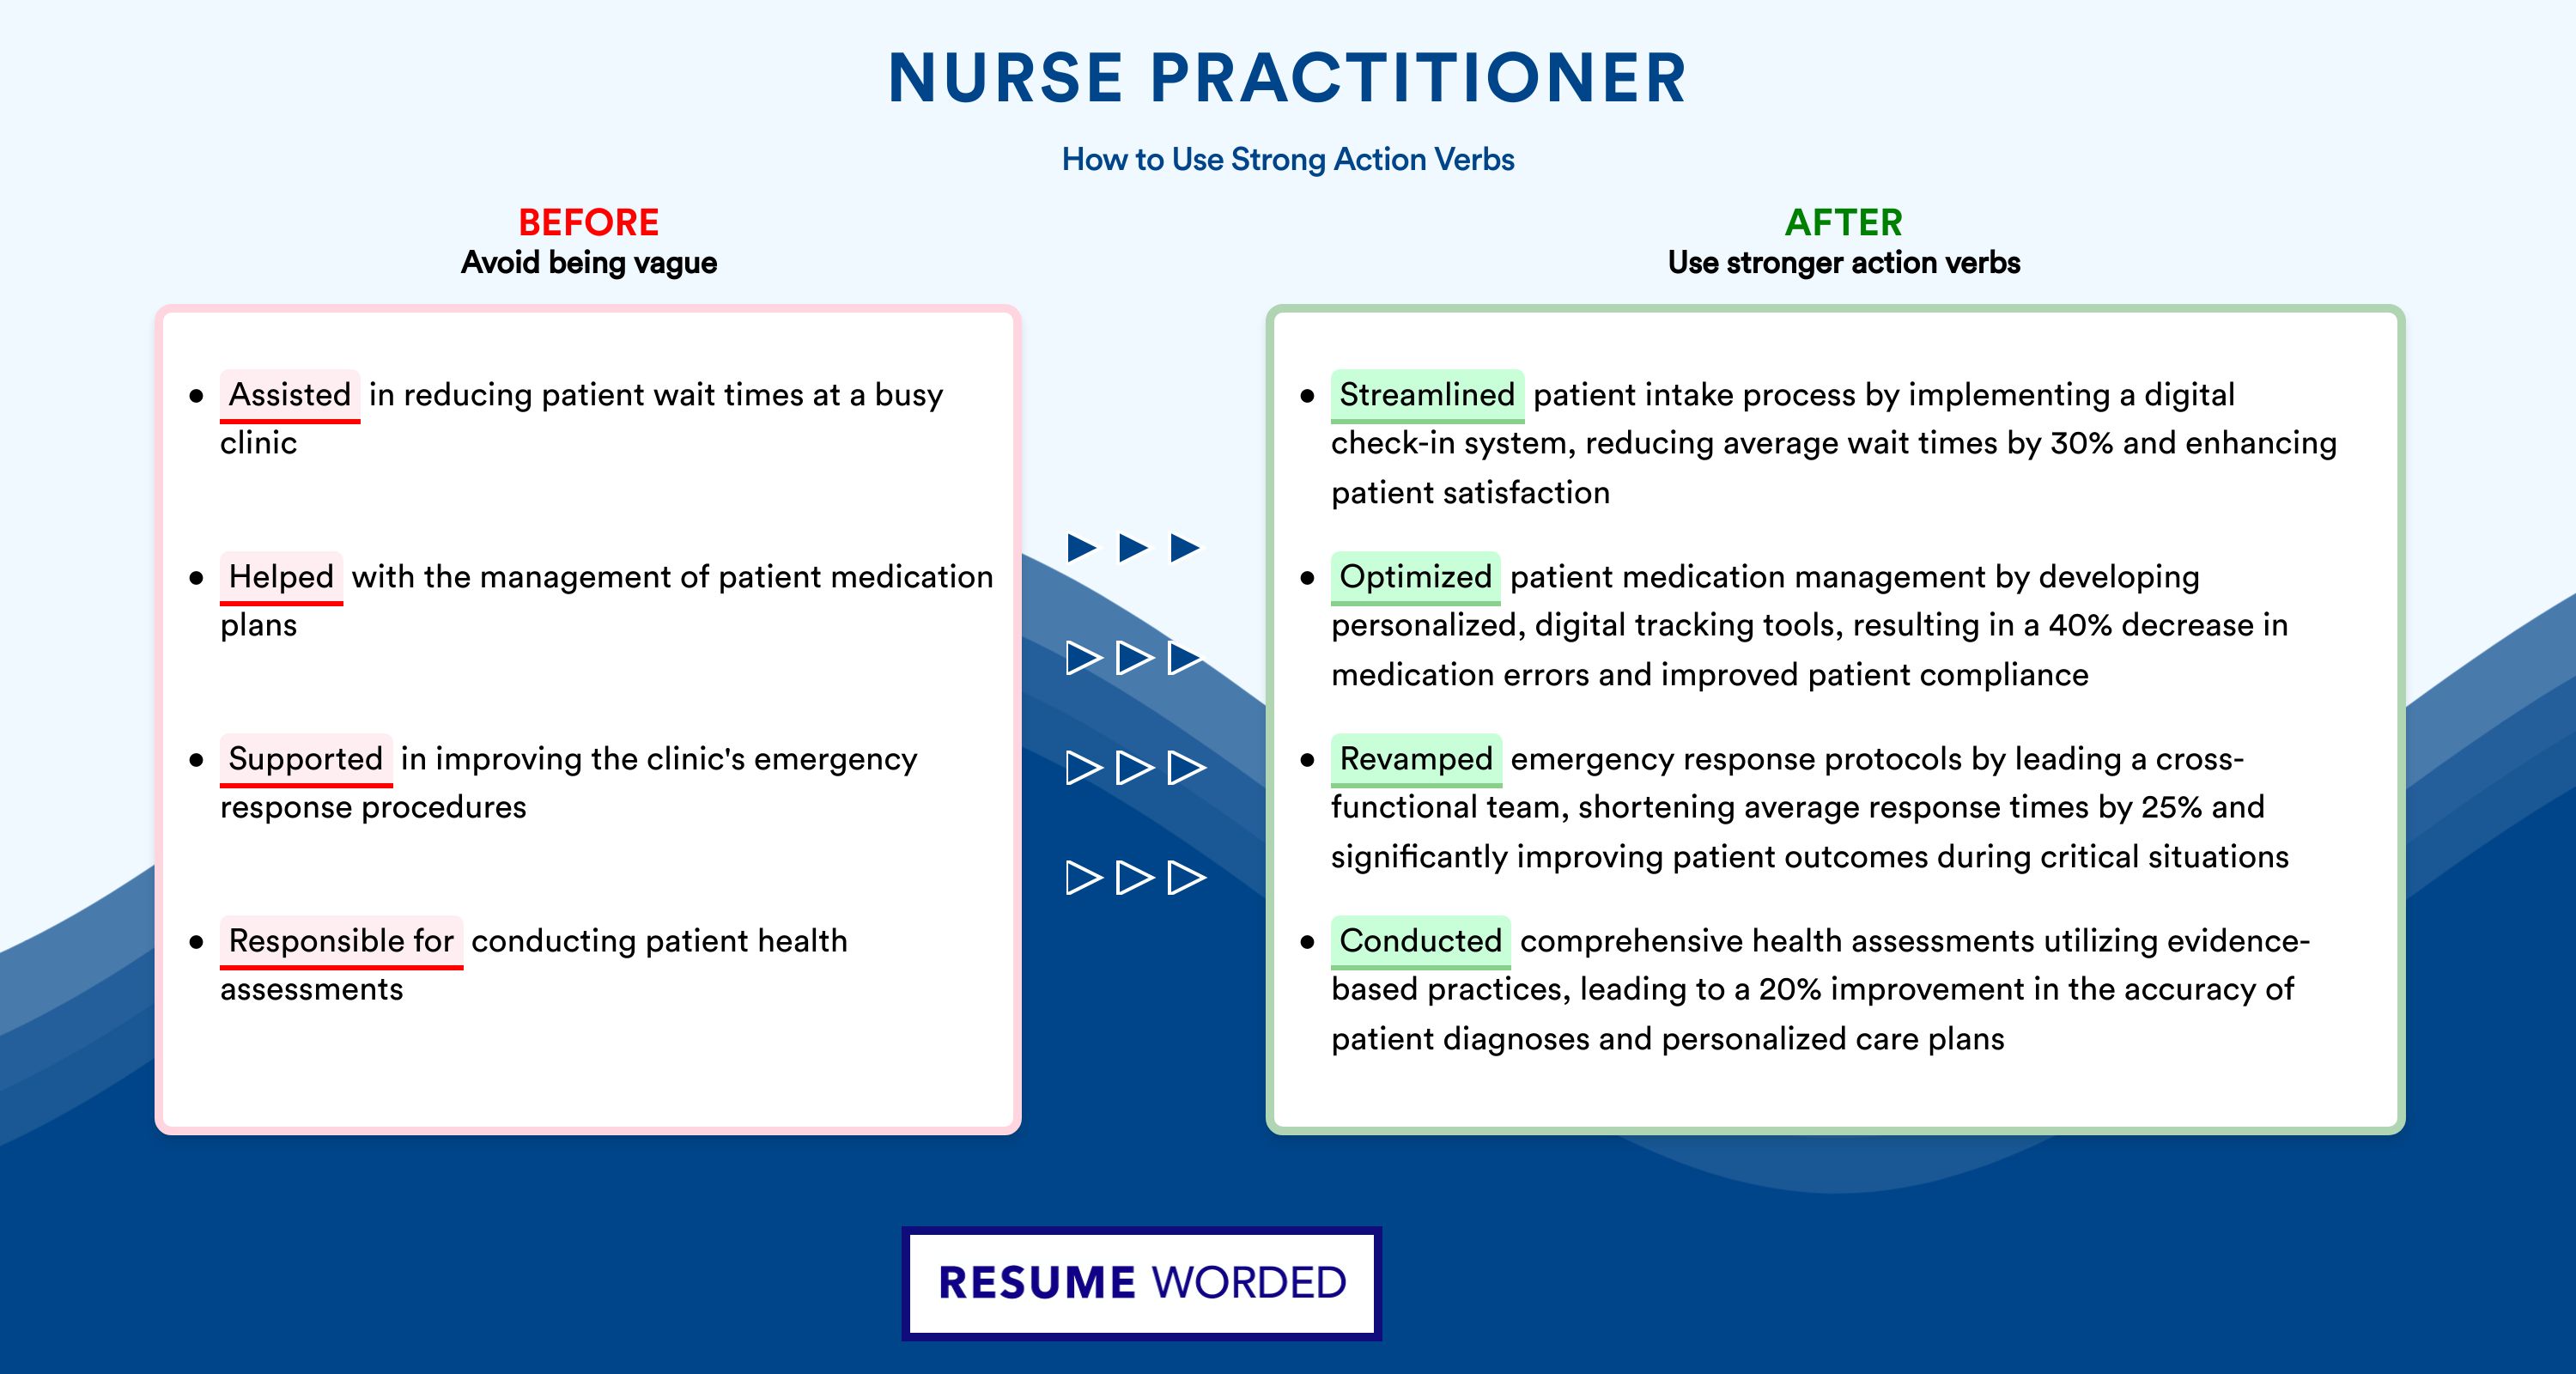 Action Verbs for Nurse Practitioner